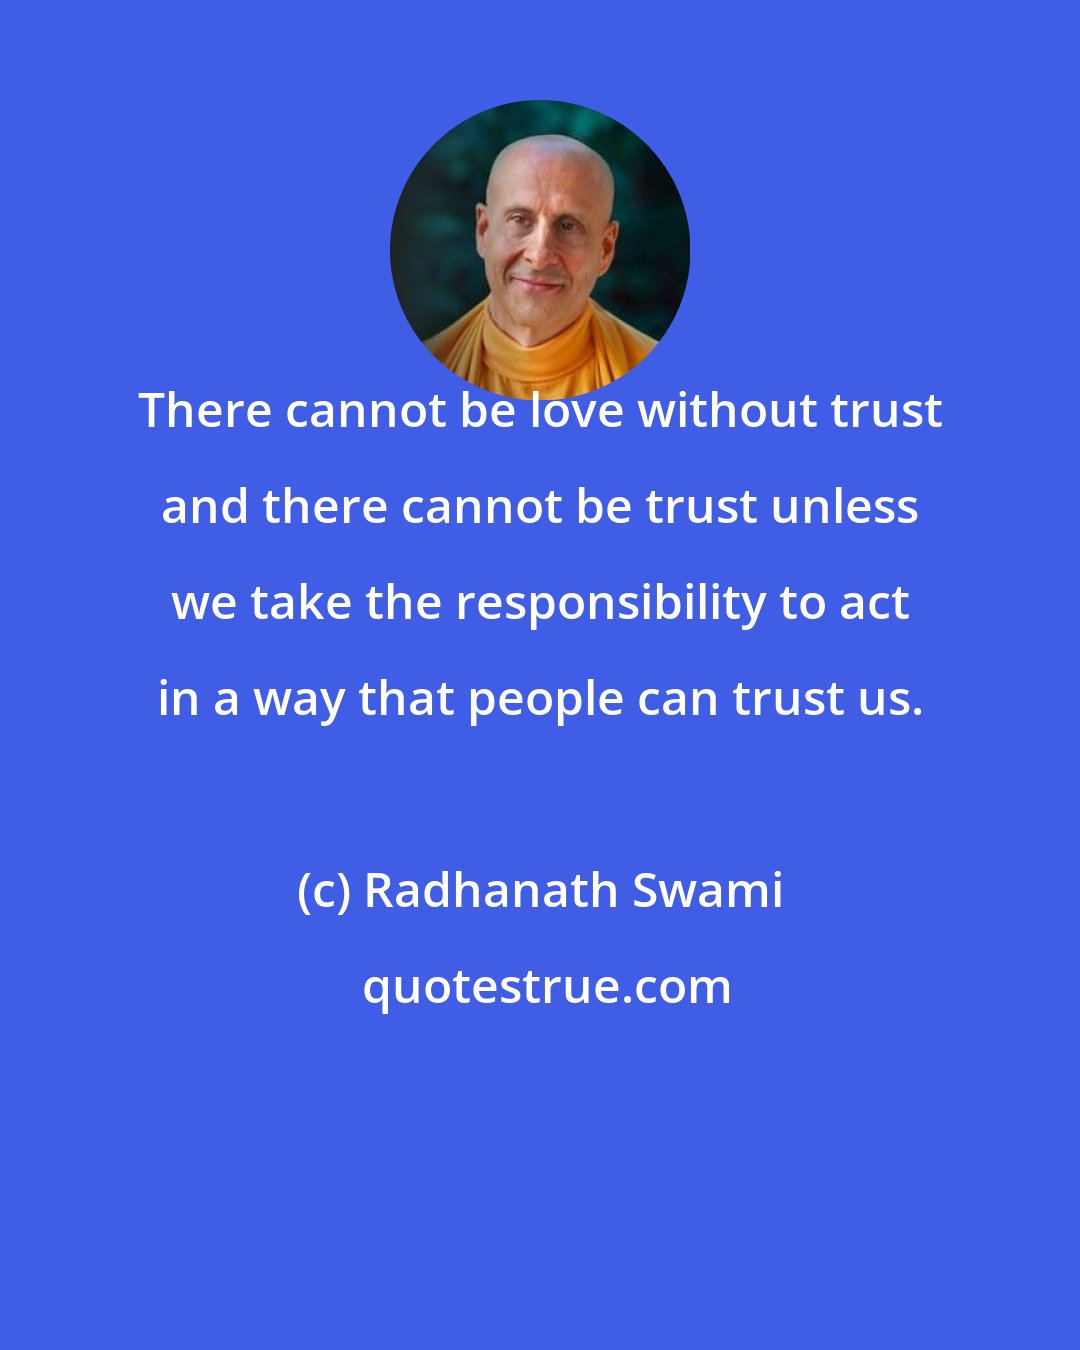 Radhanath Swami: There cannot be love without trust and there cannot be trust unless we take the responsibility to act in a way that people can trust us.